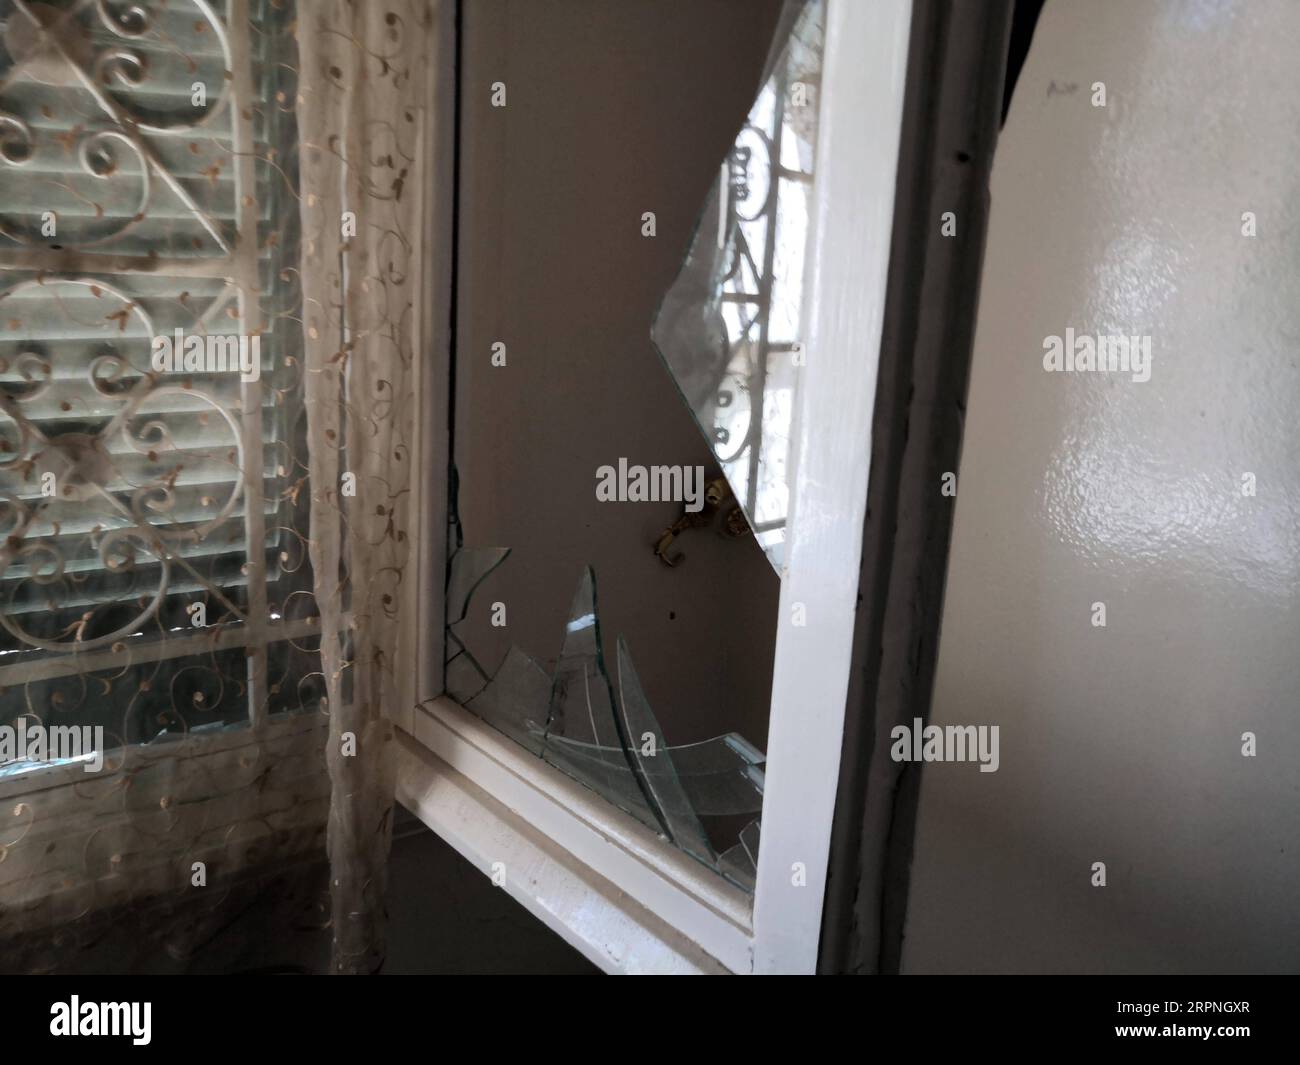 200228 -- TRIPOLI, Feb. 28, 2020 Xinhua -- A broken windows is seen in a resident s house in Abu Salim, southern Tripoli, Libya, Feb. 28, 2020. The forces of the UN-backed Libyan government said on Friday that the rival east-based army attacked the Mitiga International Airport in Tripoli with heavy shelling. Haftar commander of the east-based army targeted the Mitiga Airport and its surroundings, as well as a number of residential neighborhoods in the capital Tripoli, with more than 60 Grad missiles, the UN-backed government forces said in a statement. Photo by Hamza Turkia/Xinhua LIBYA-TRIPOL Stock Photo